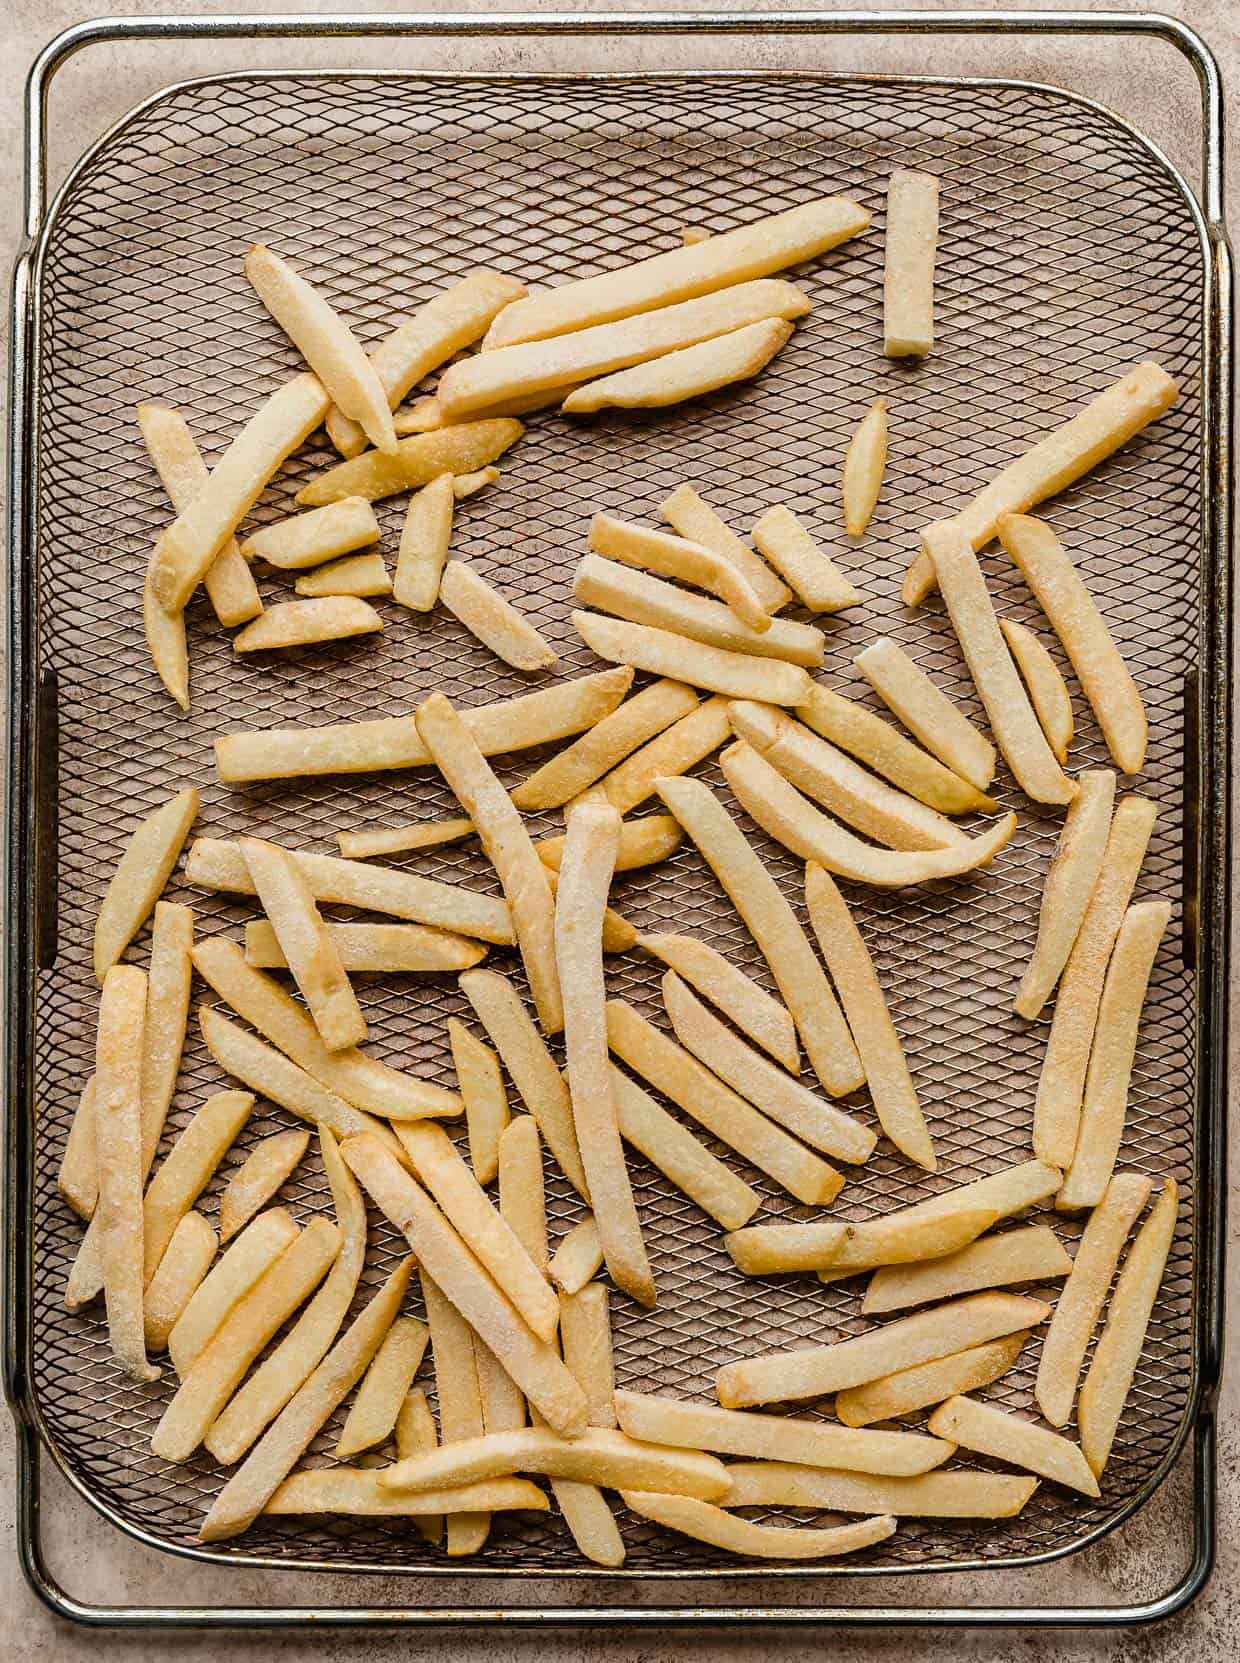 Frozen French fries on a metal air fryer basket.